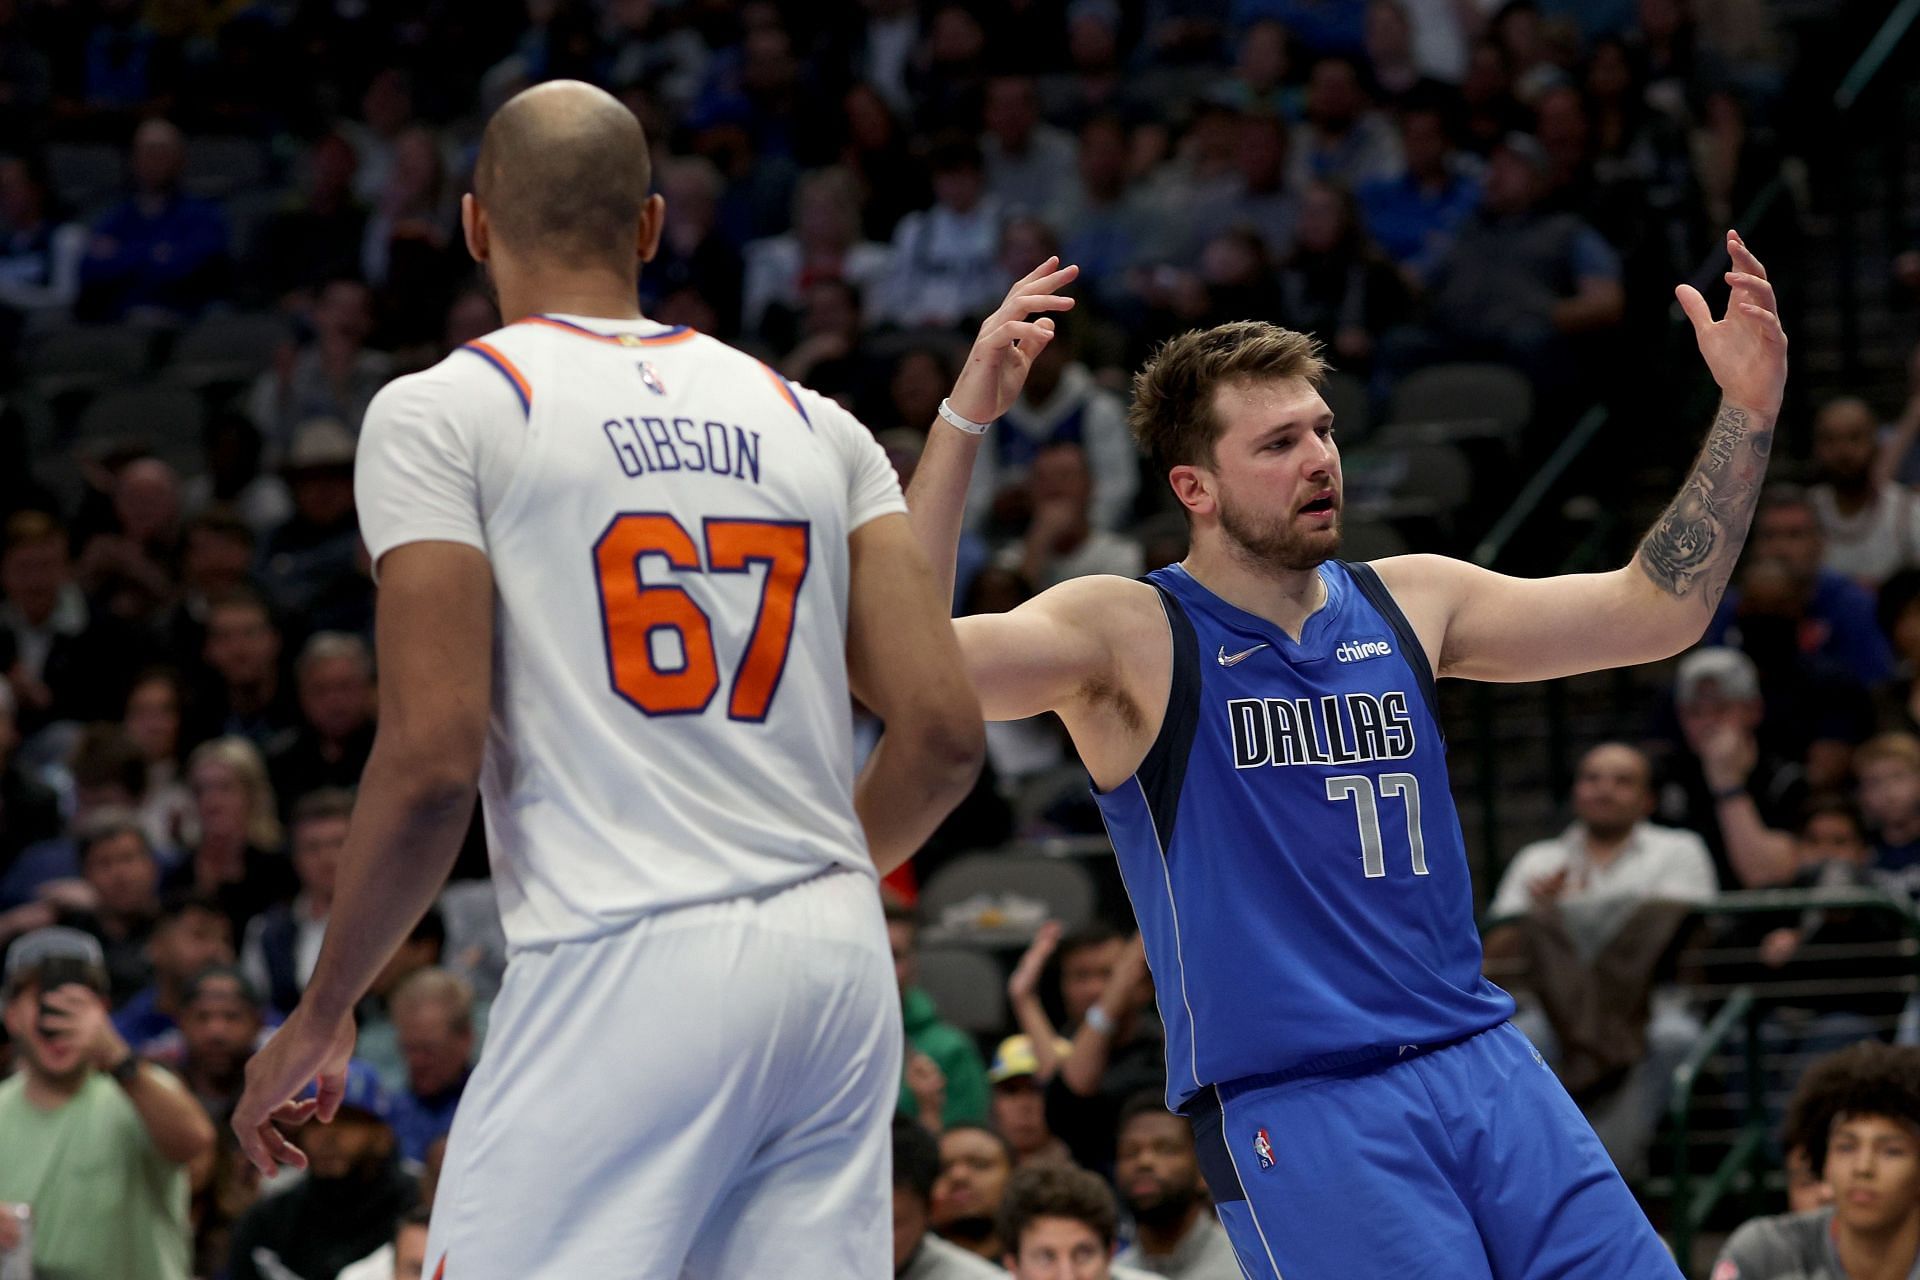 Luka Doncic of the Dallas Mavericks reacts against Taj Gibson of the New York Knicks.